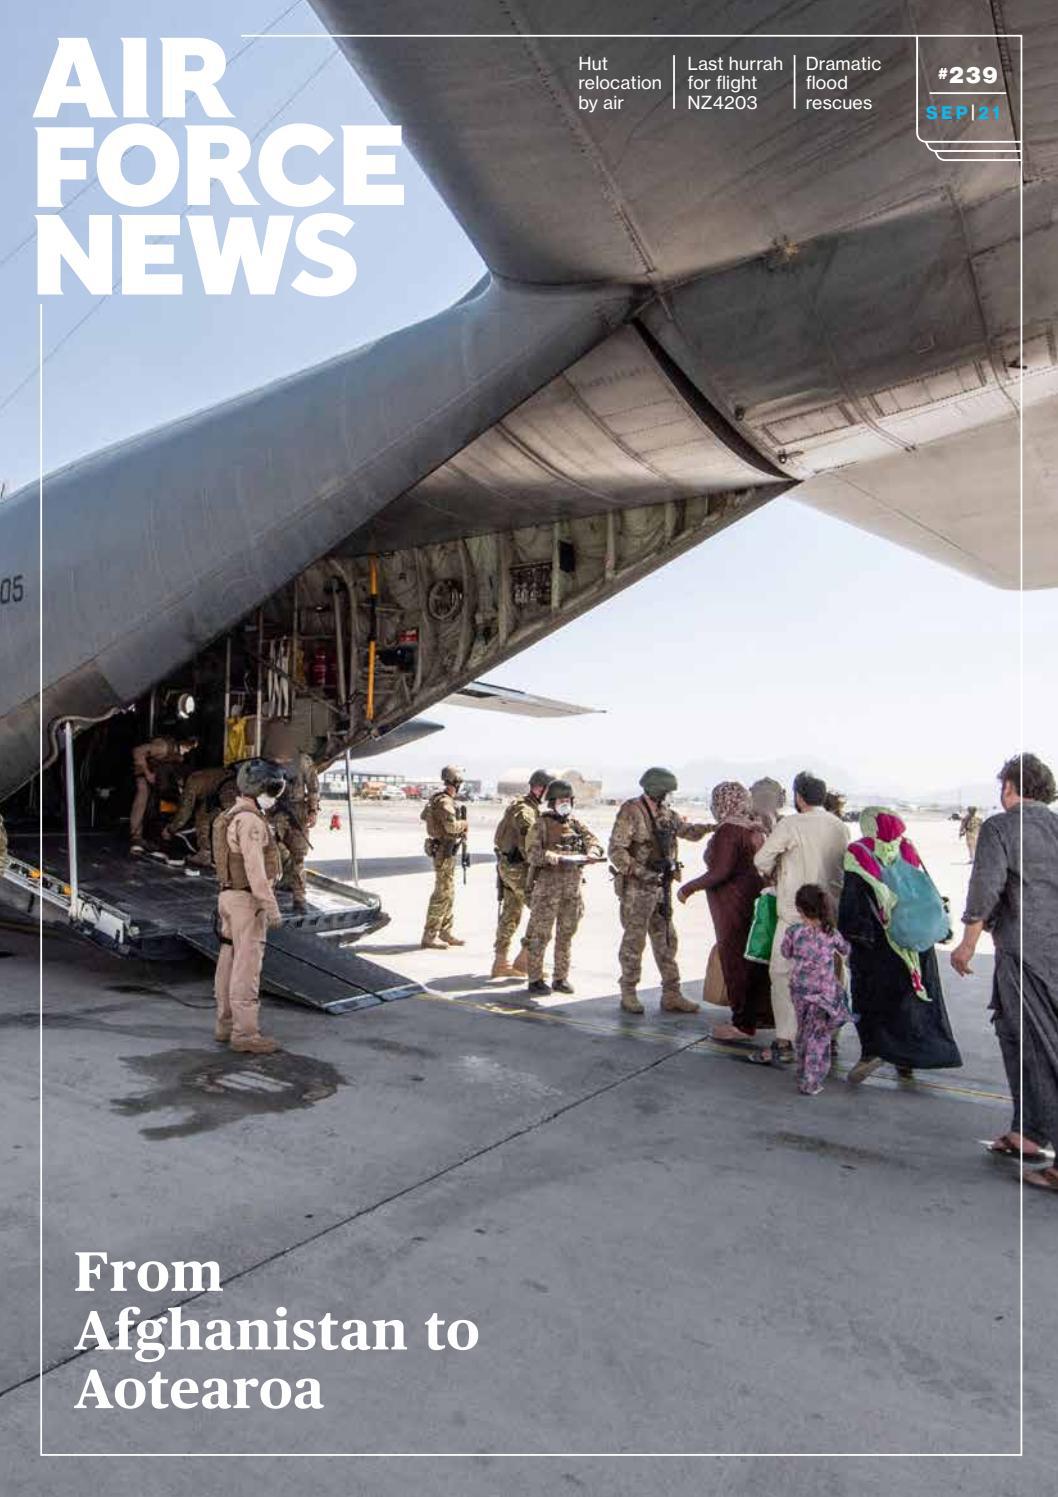 Royal New Zealand Air Force | Air Force News - Issue 239, September 2021